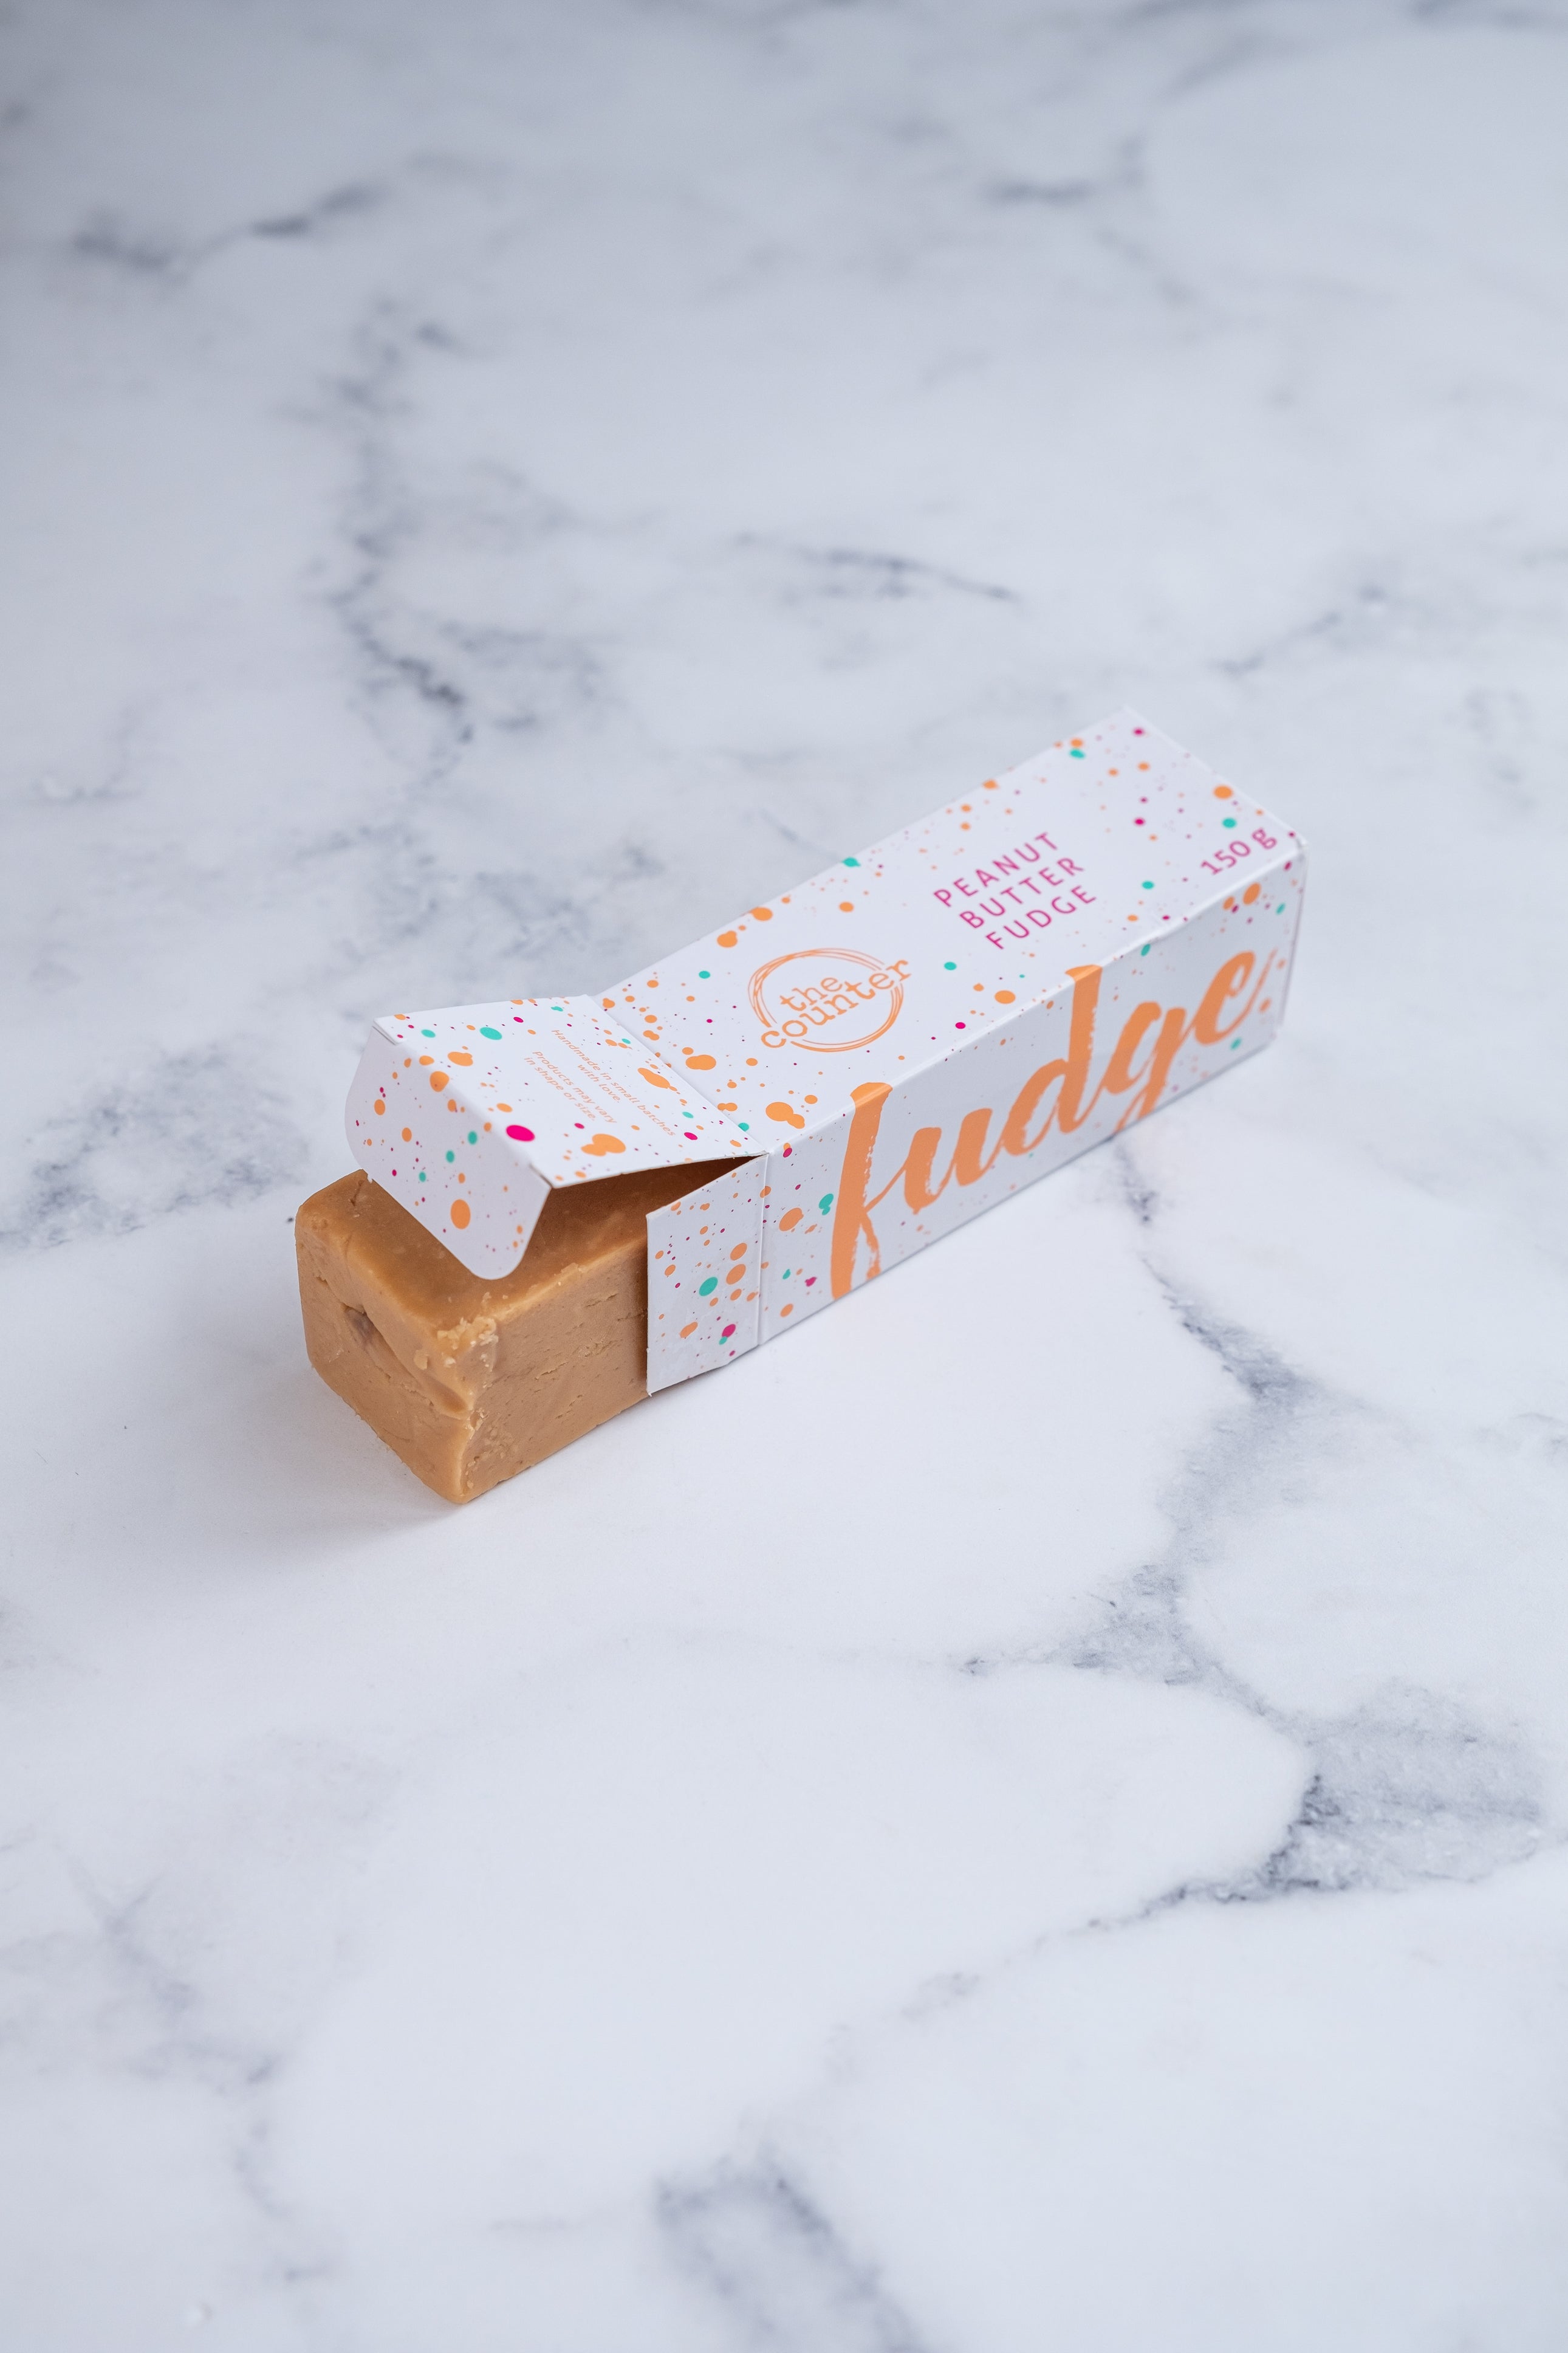 A large bar of peanut butter fudge peeks our from a white box. Paint splashes in bright orange and pink surround a messy circled logo for The Counter and the words 'Peanut Butter fudge' are written in cerise pink block lettering.